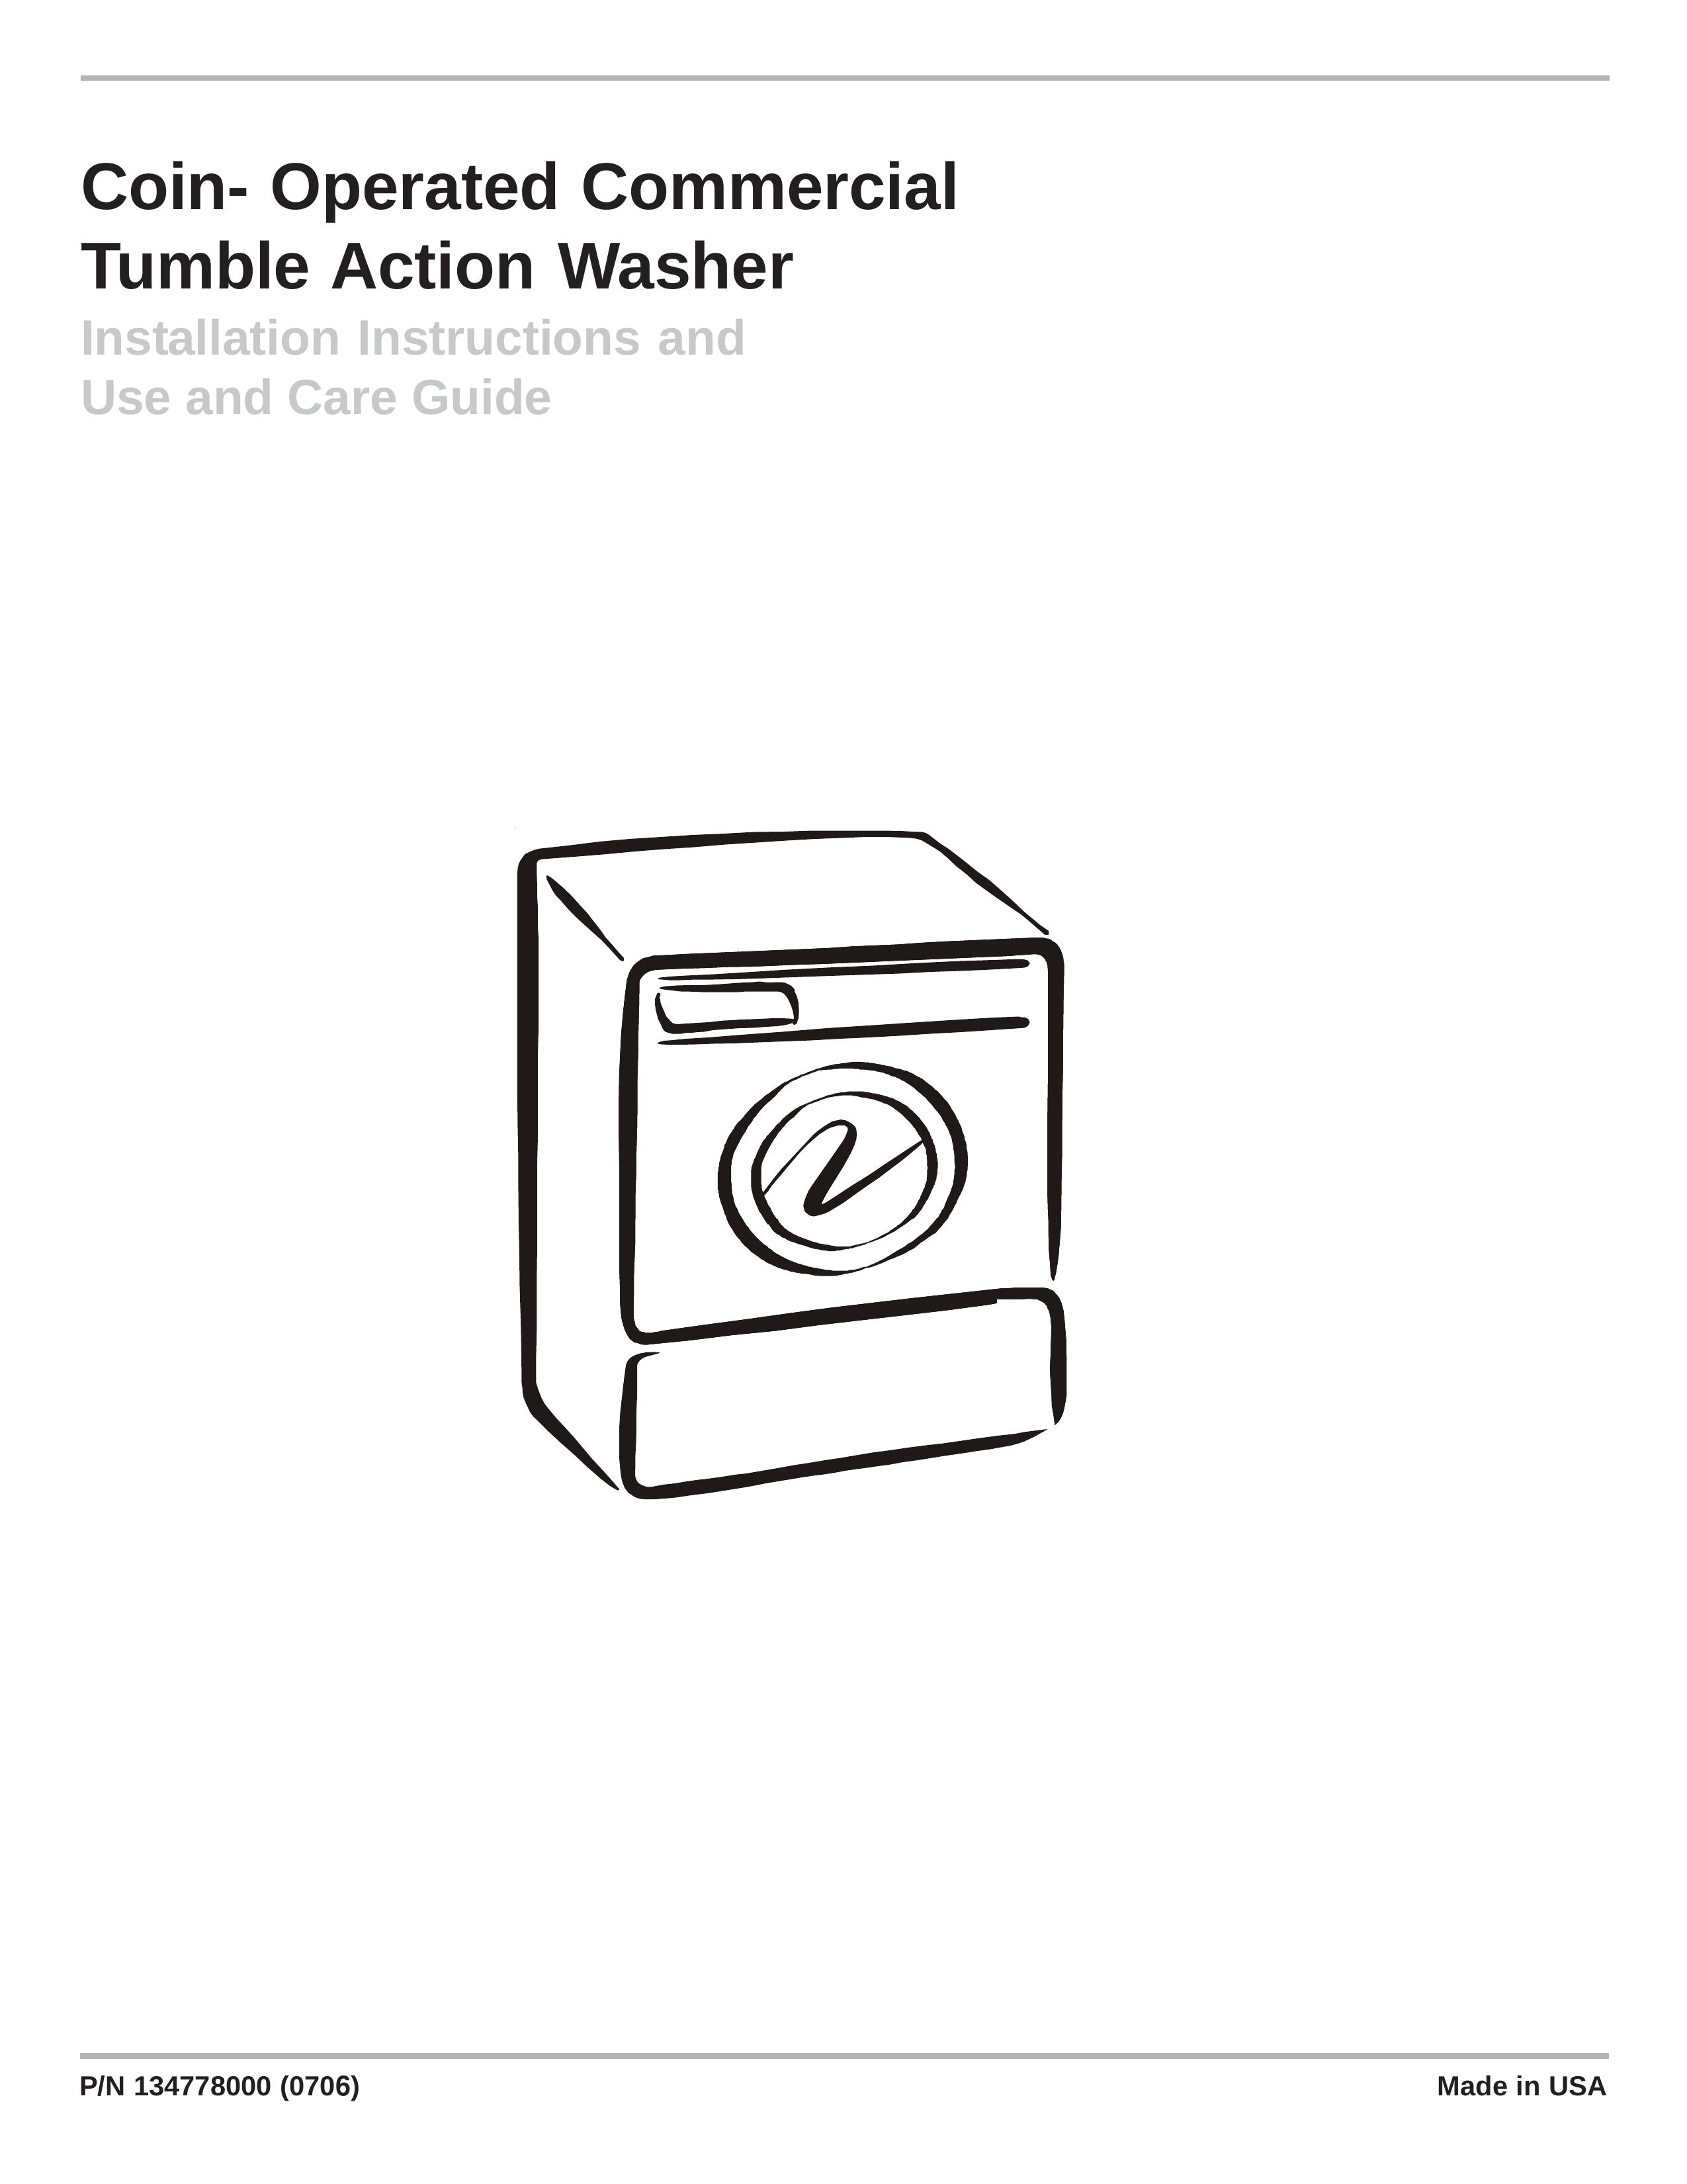 Frigidaire Coin- Operated Commercial Tumble Action Washer Washer User Manual